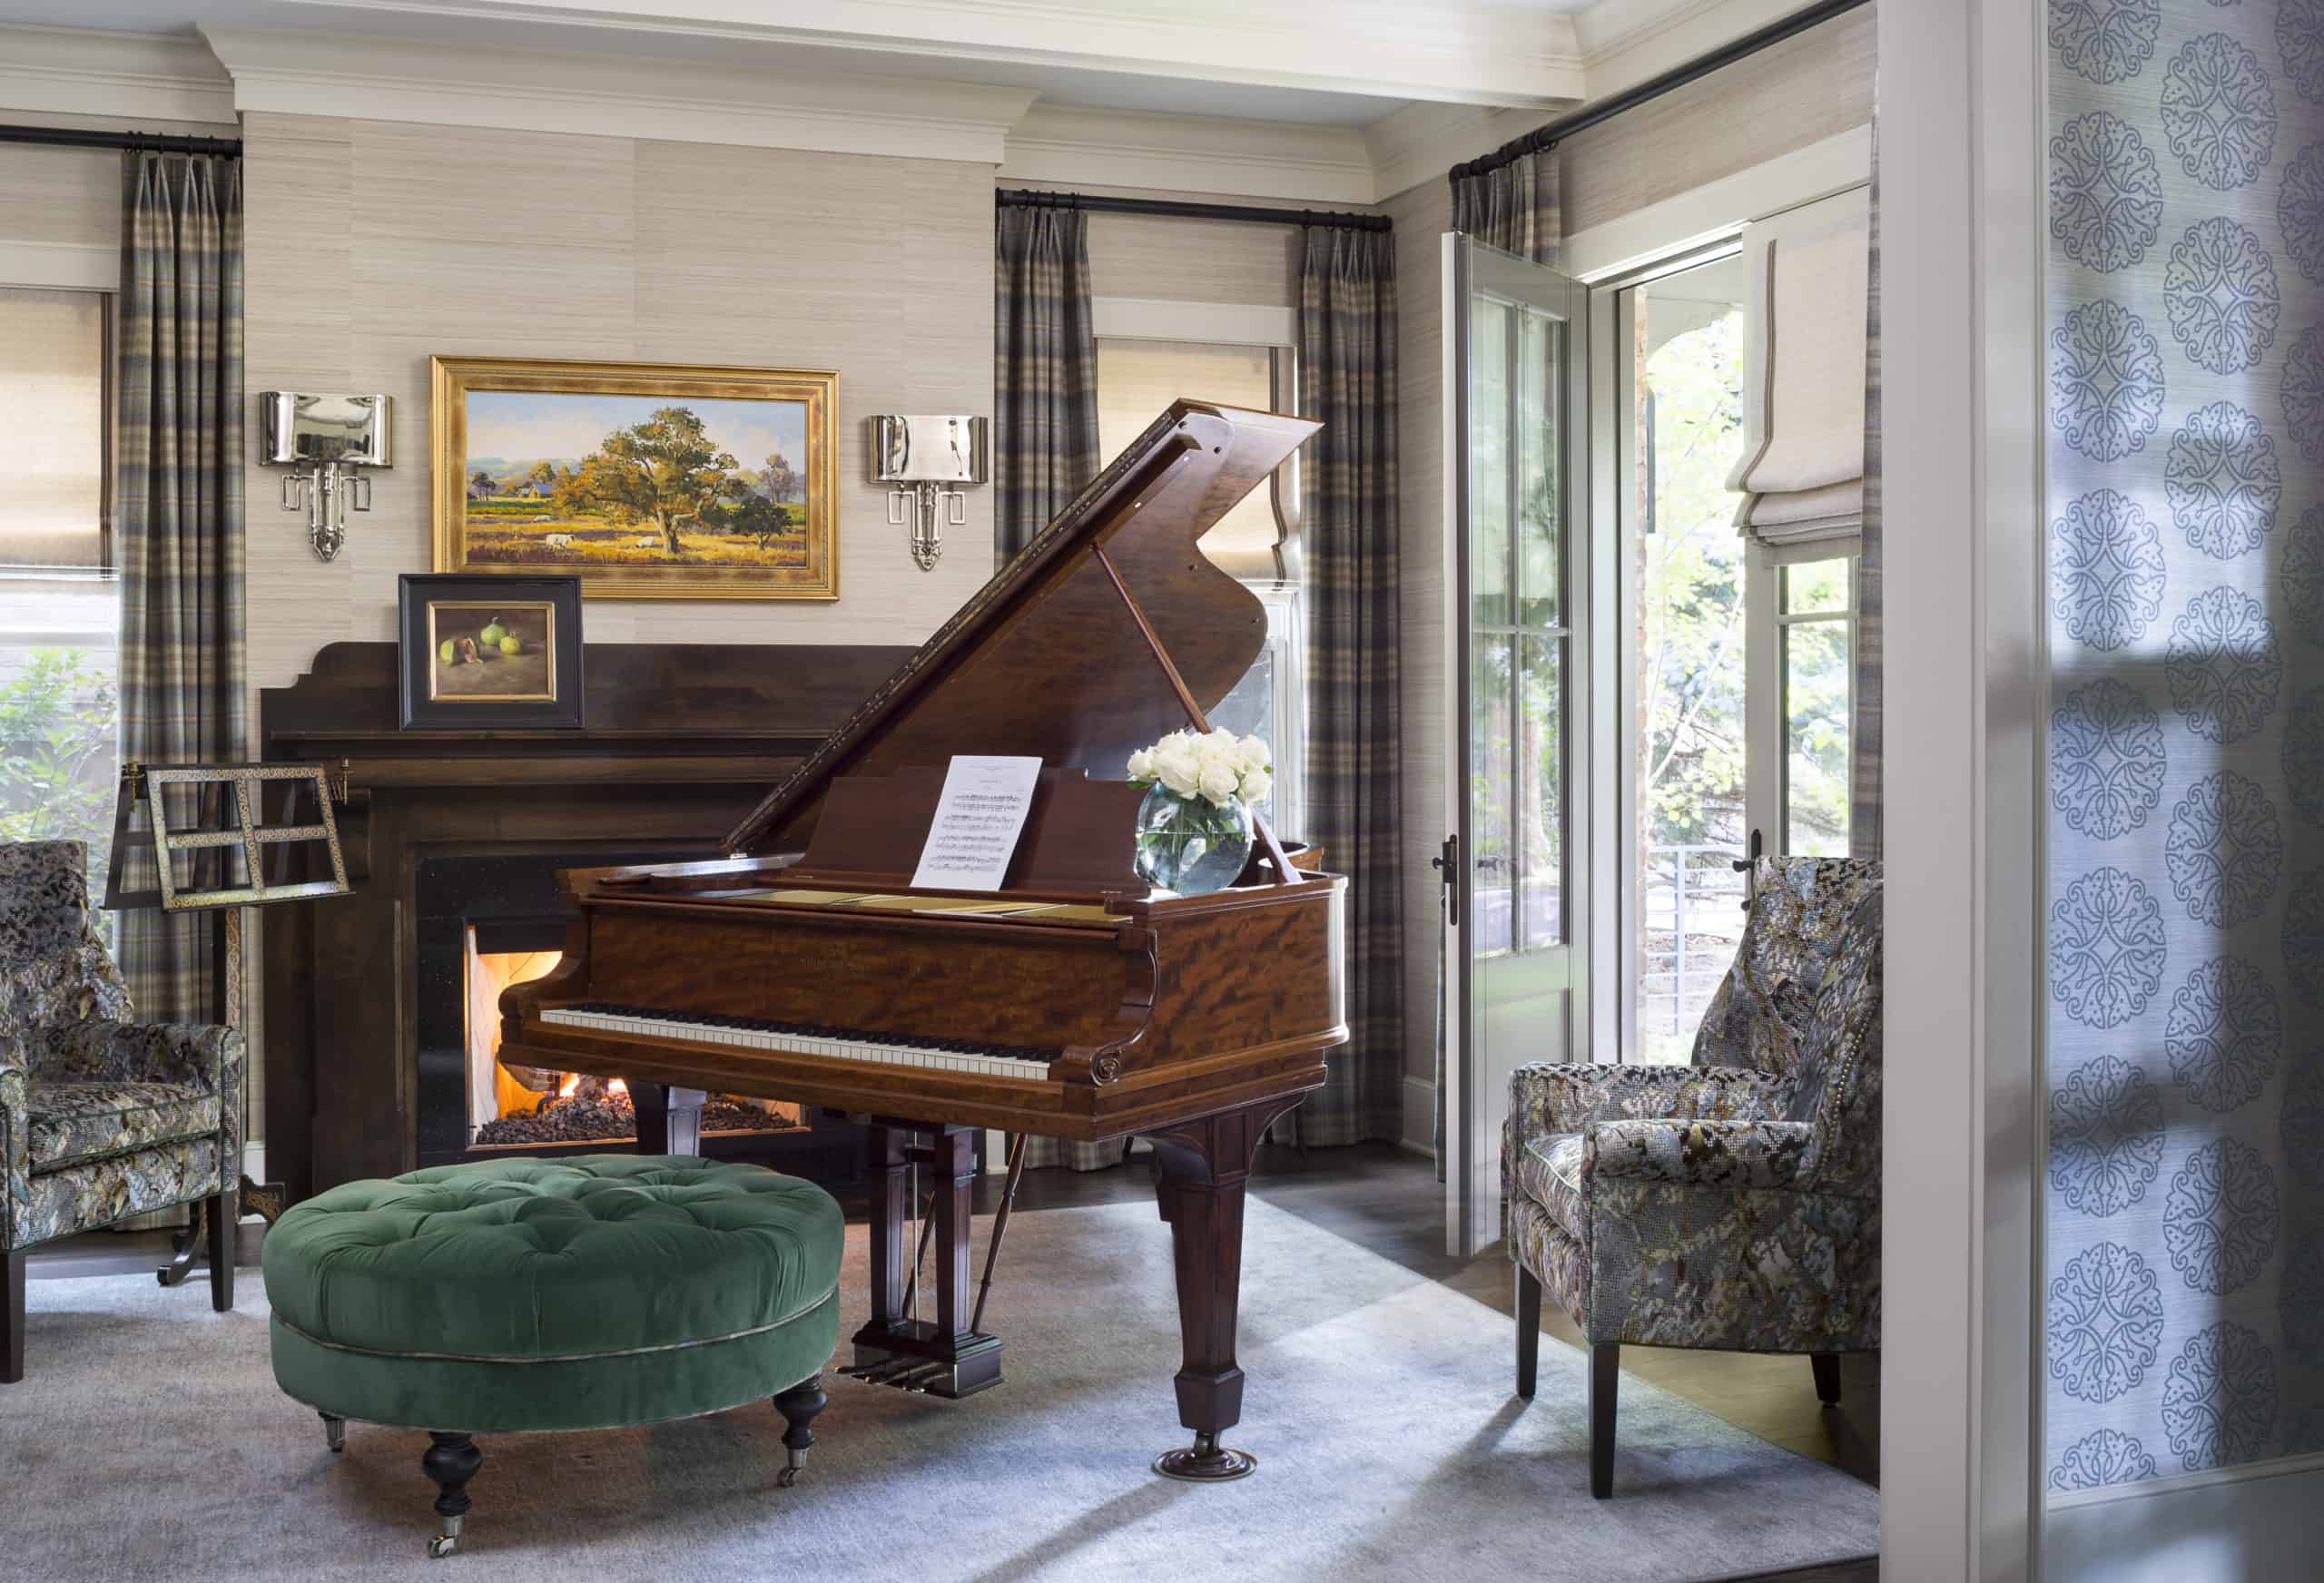 Stylish Piano Room with Green Ottoman and Fireplace